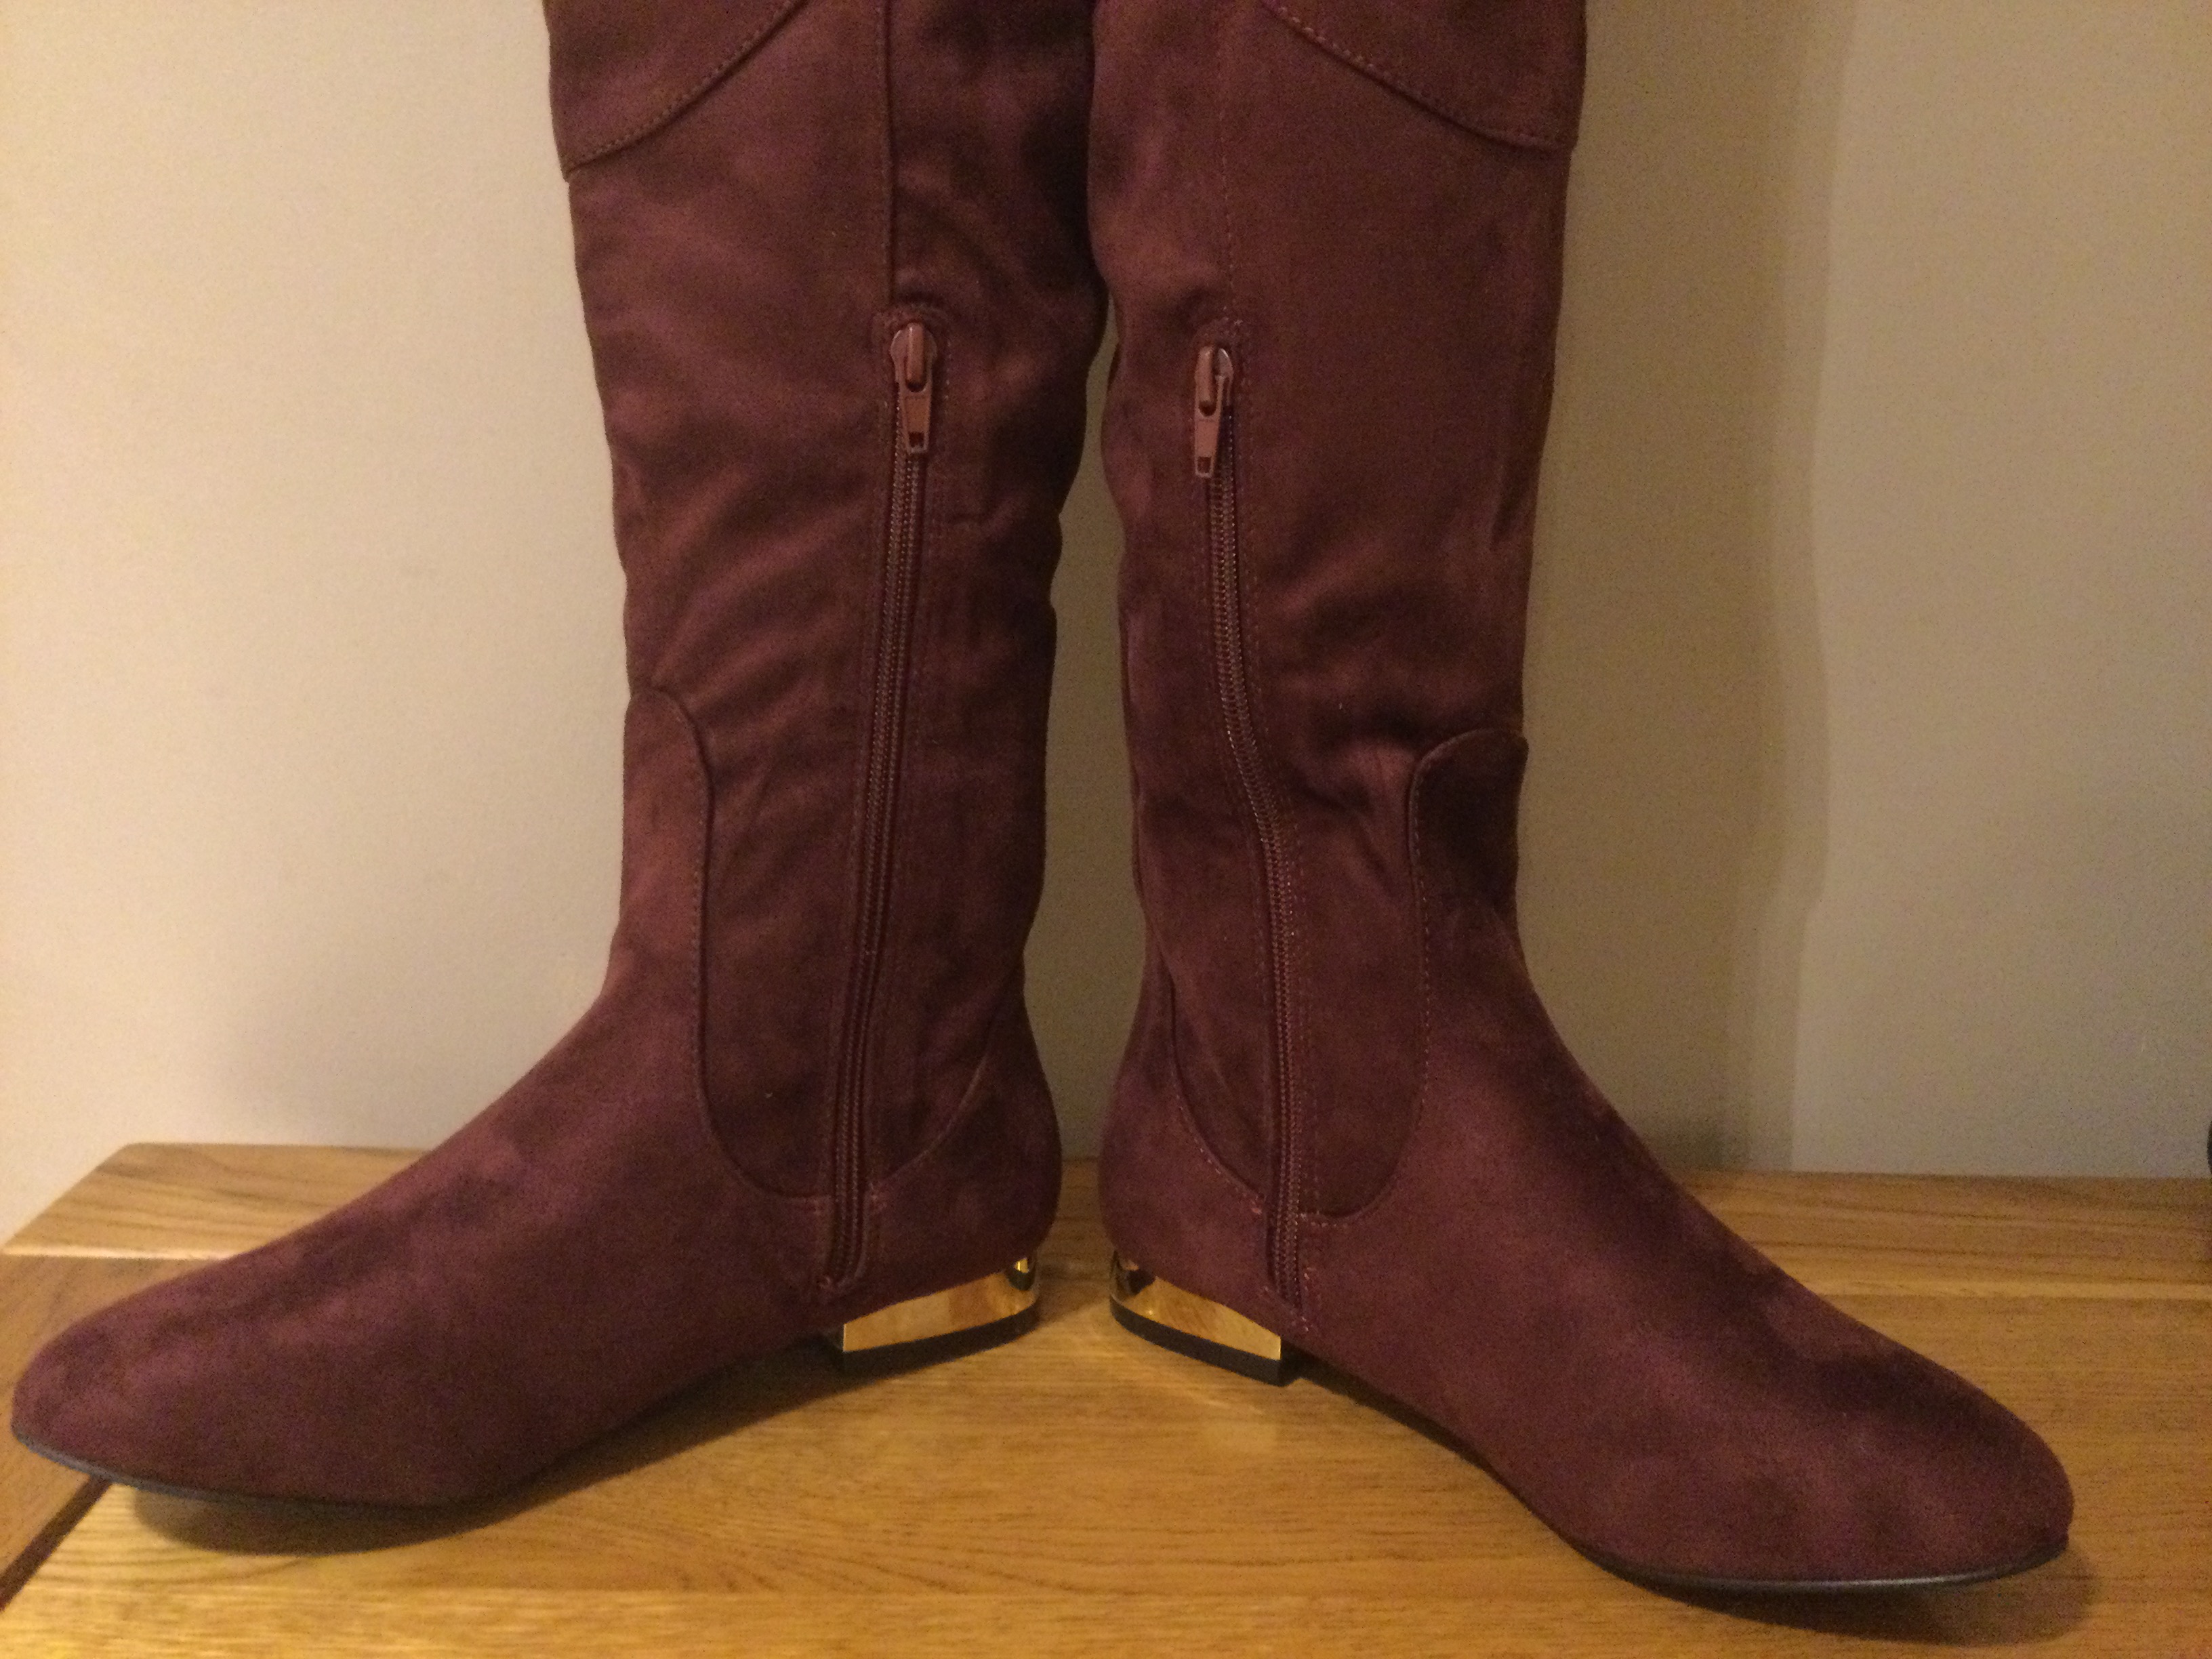 Dolcis “Katie” Long Boots, Low Heel, Size 4, Burgundy - New RRP £55.00 - Image 7 of 7